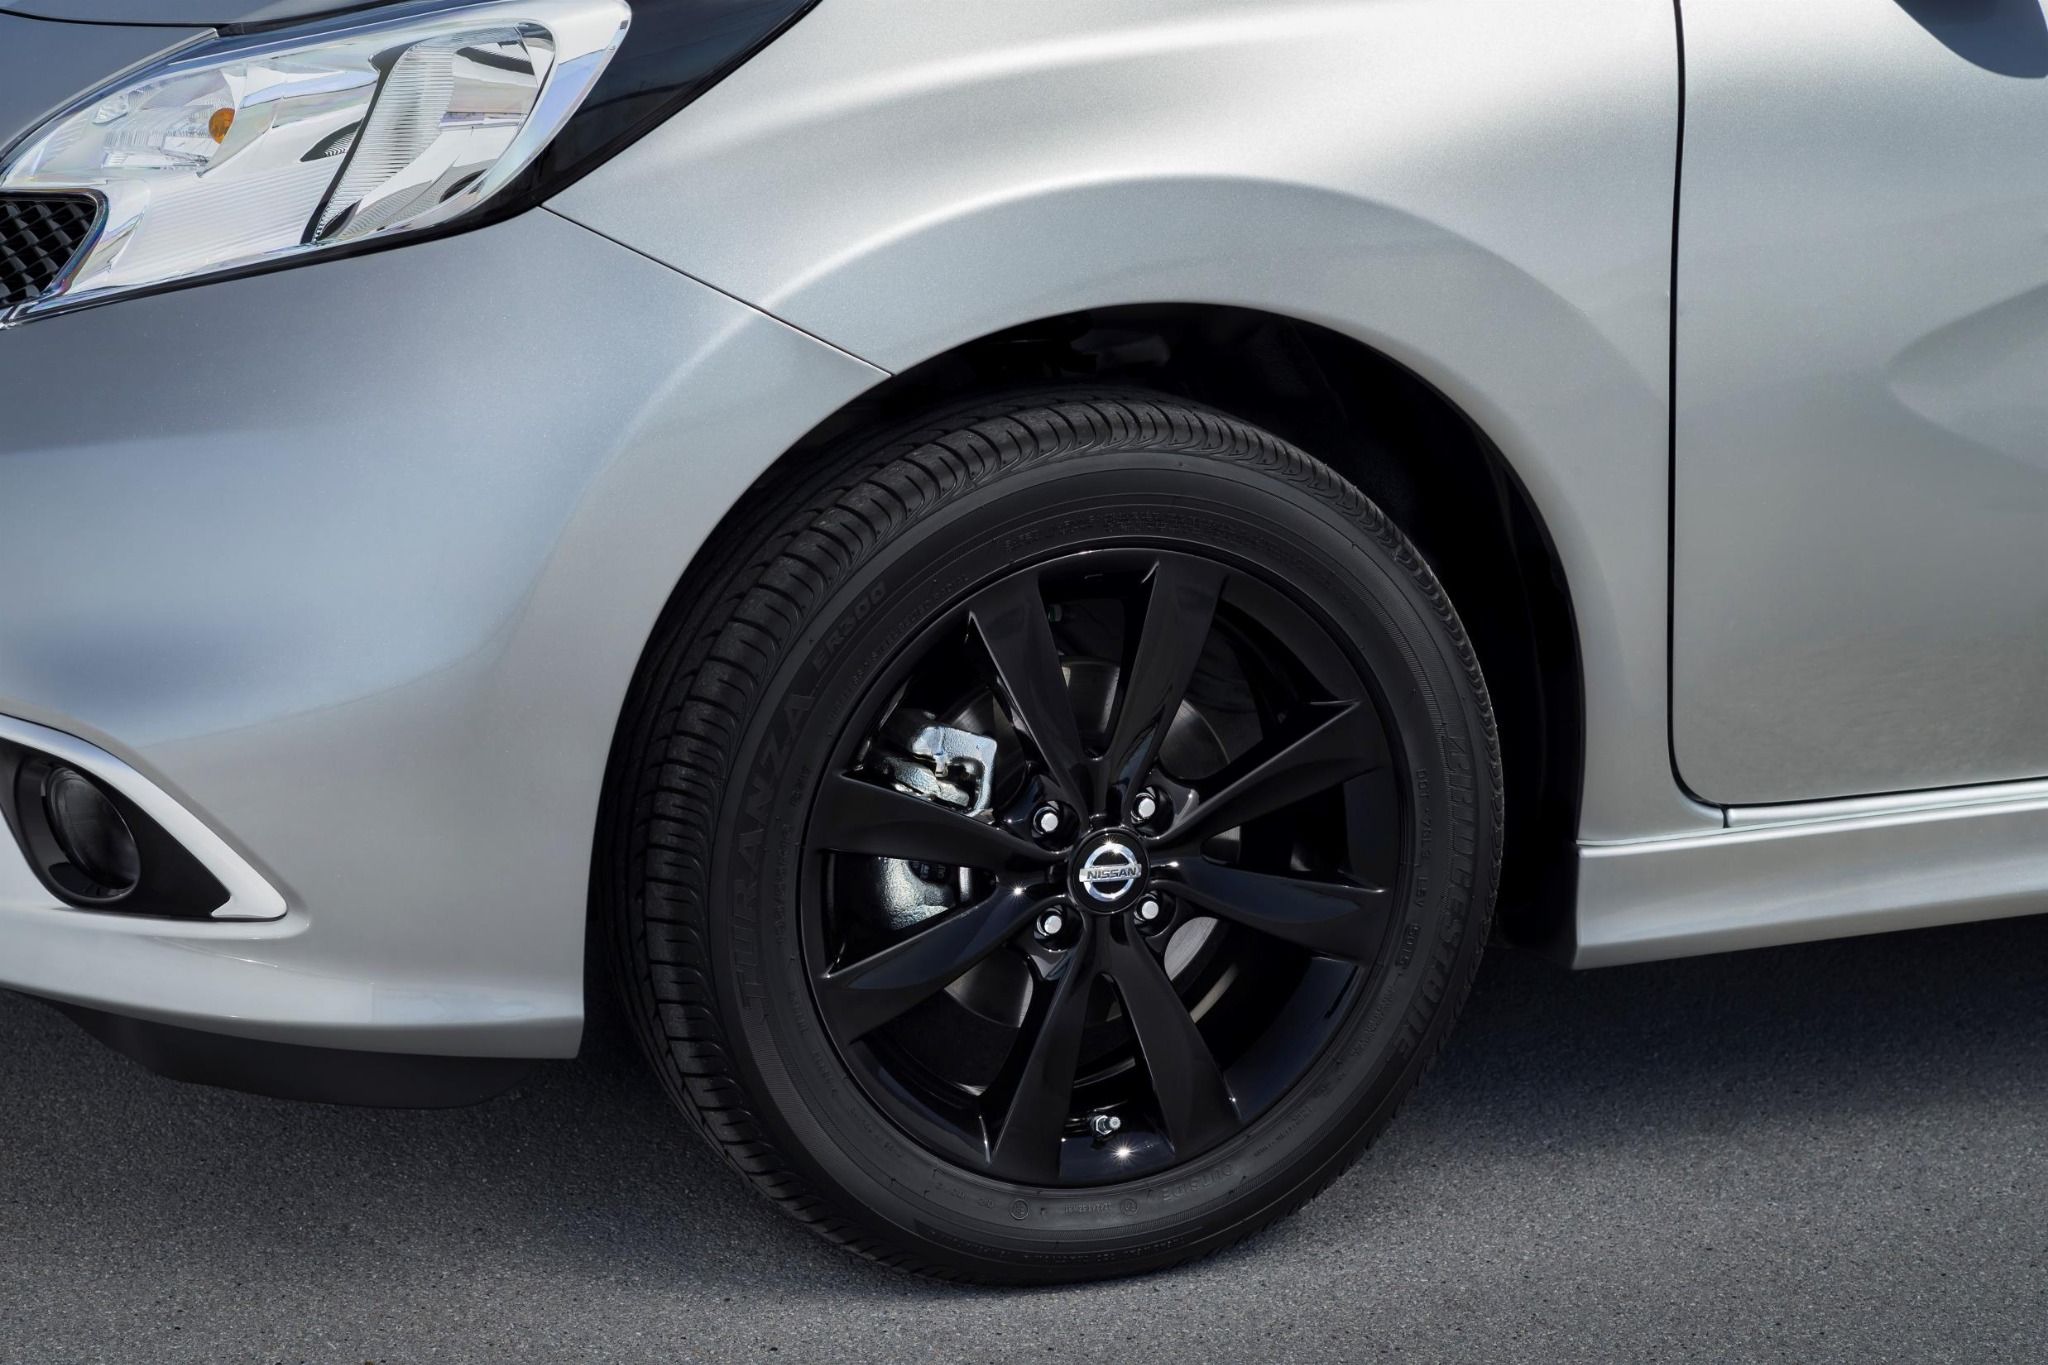 Nissan tyres and black alloys